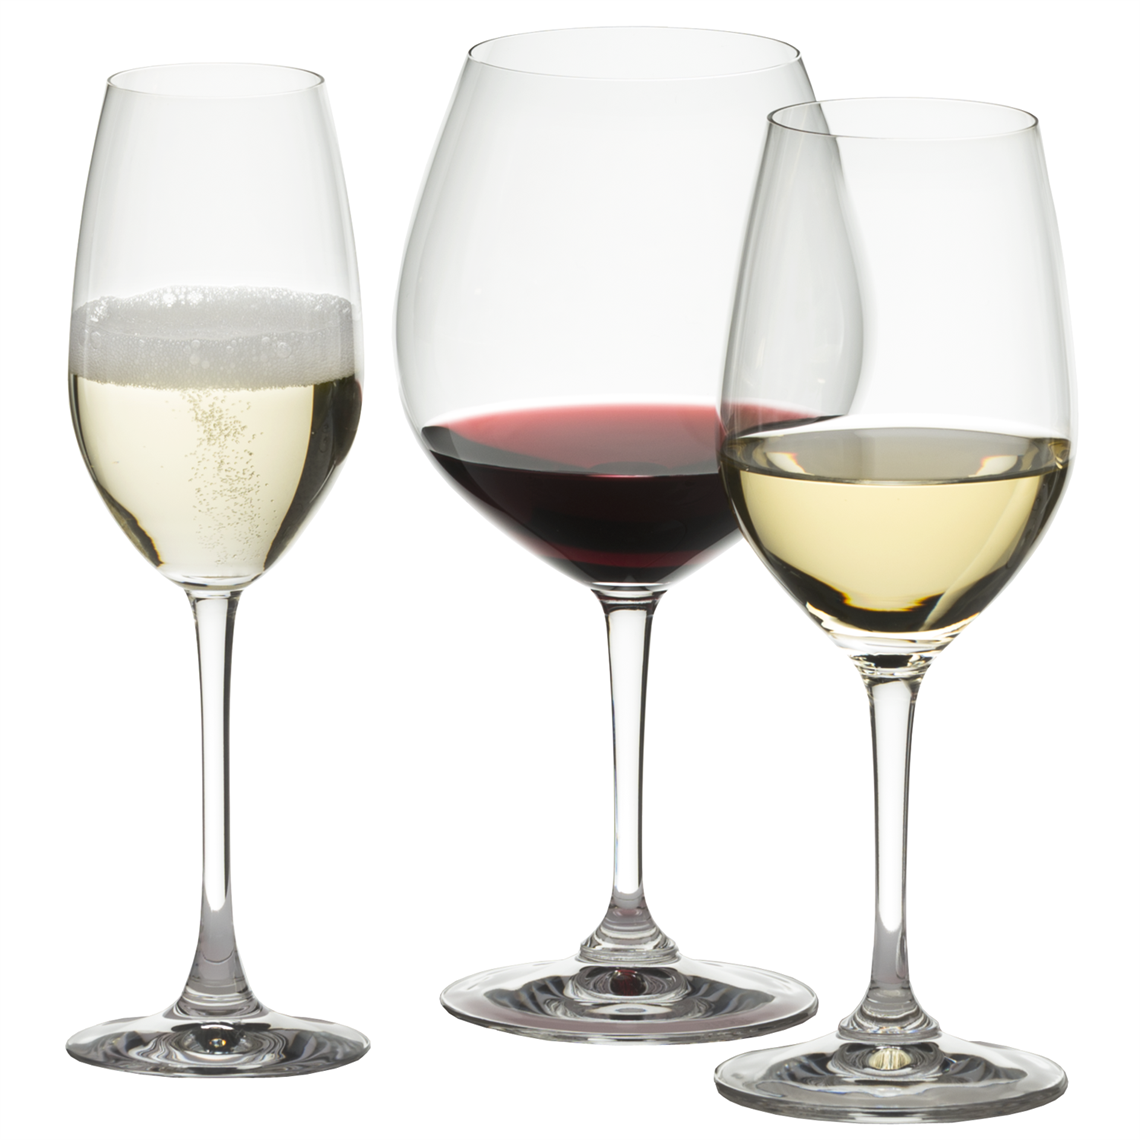 View more chablis wine glasses from our Restaurant & Trade Glasses range